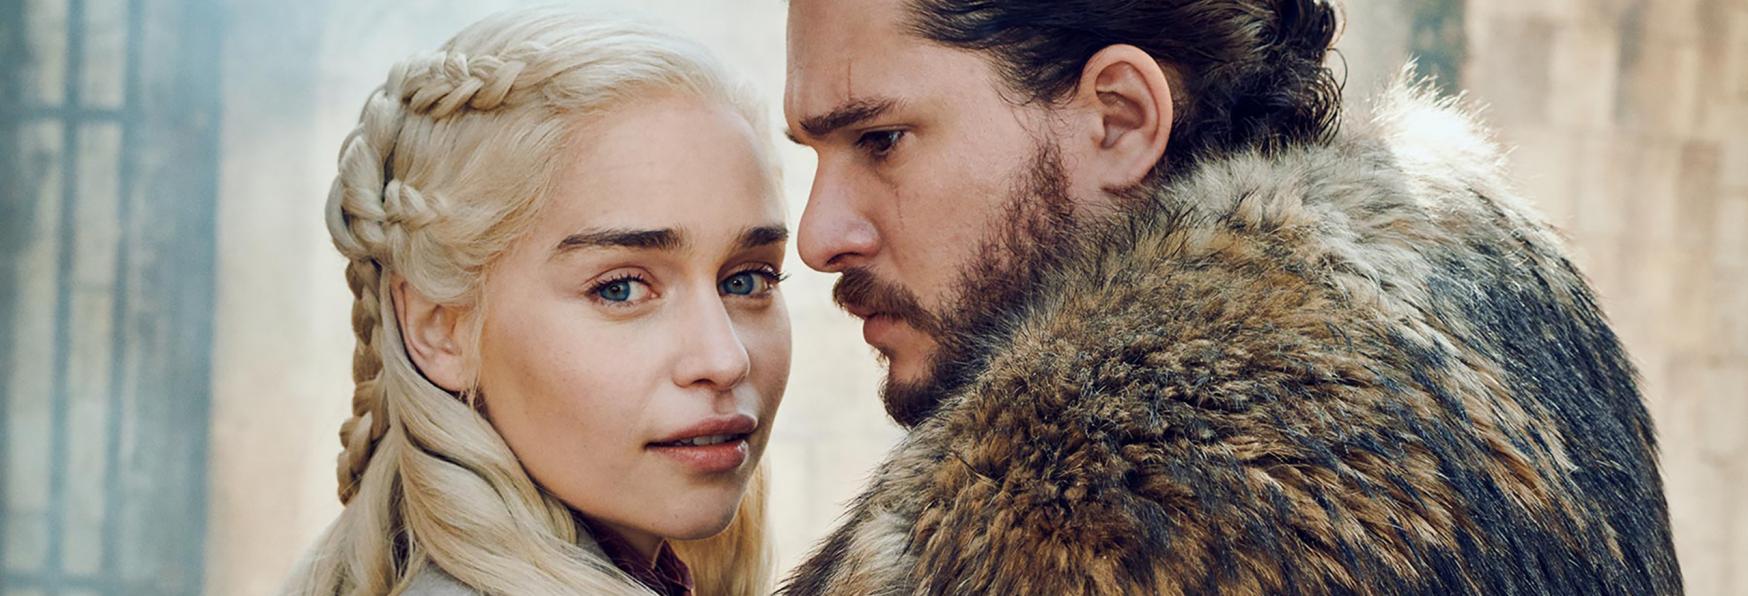 Game of Thrones: Emilia Clarke on the TV Series Spin-off with Jon Snow, "is created by Kit Harington"